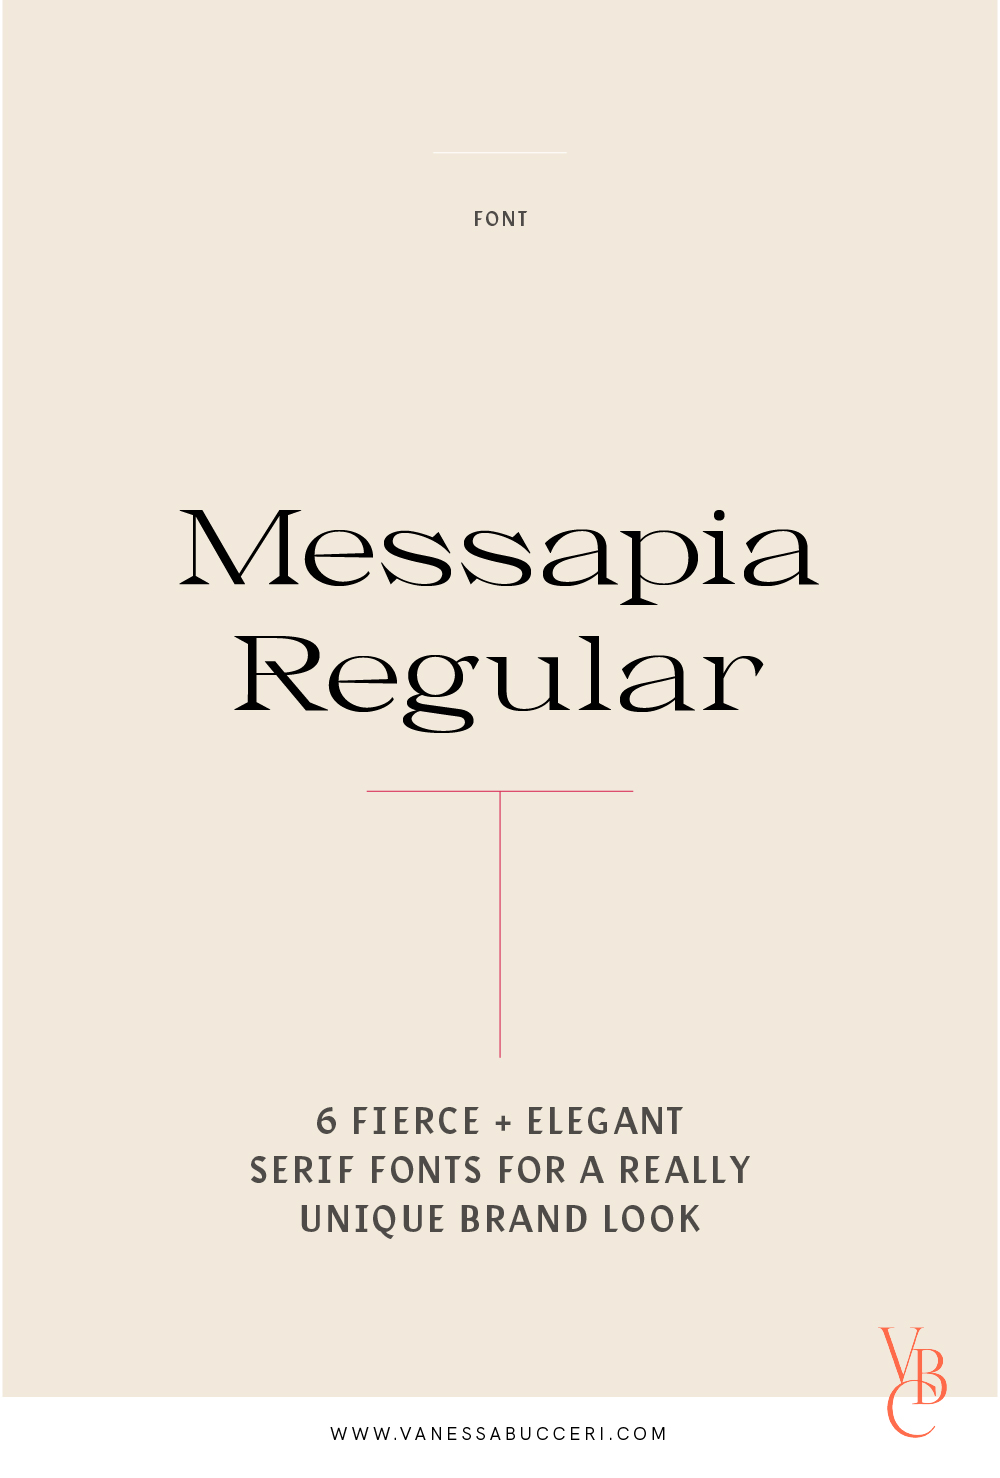 Sharp and high end serif font Messapia Regular for a unique brand look